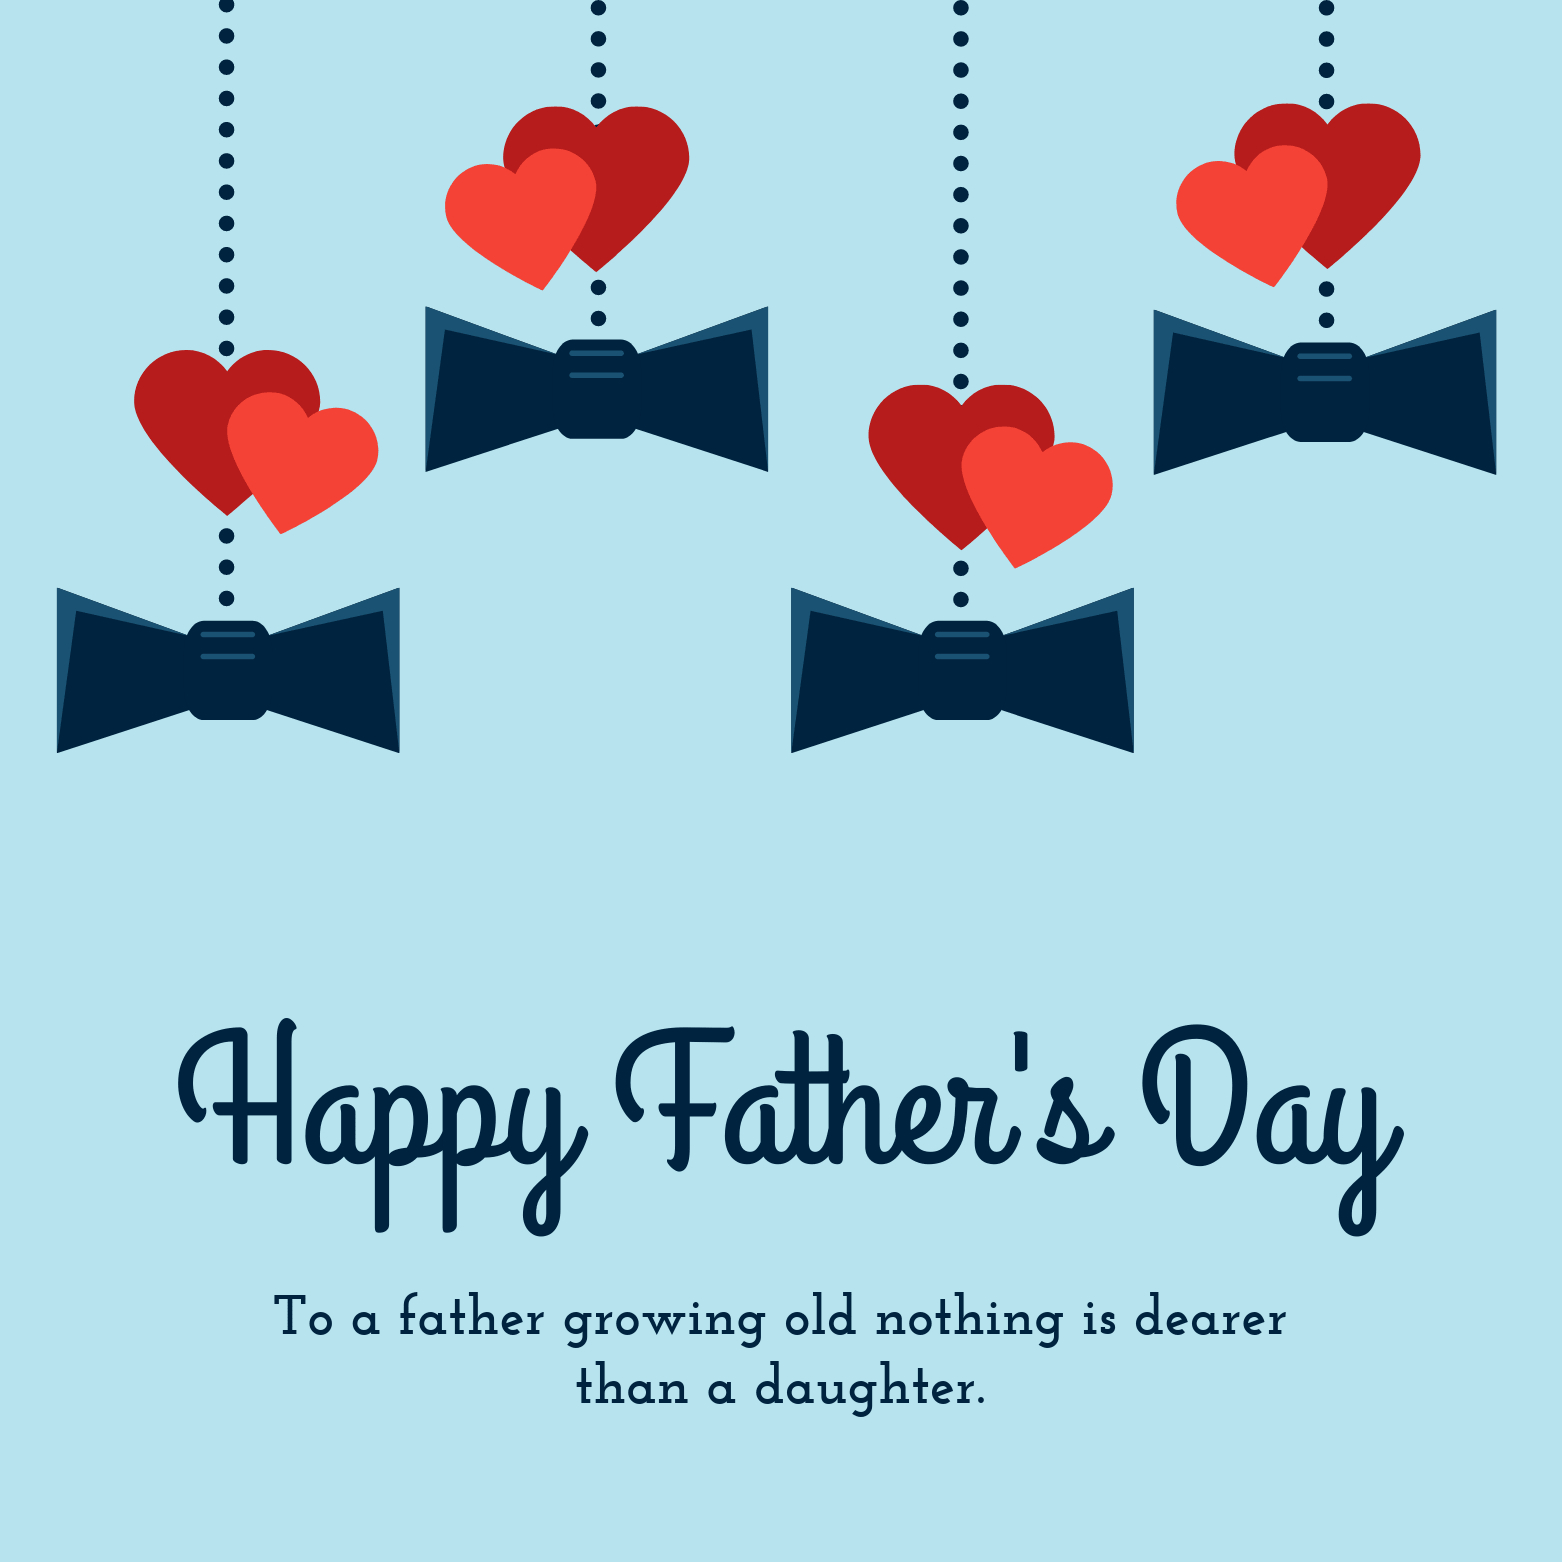 15+ Fun Father's Day Card Templates To Show Your Dad He's #1 Within Fathers Day Card Template